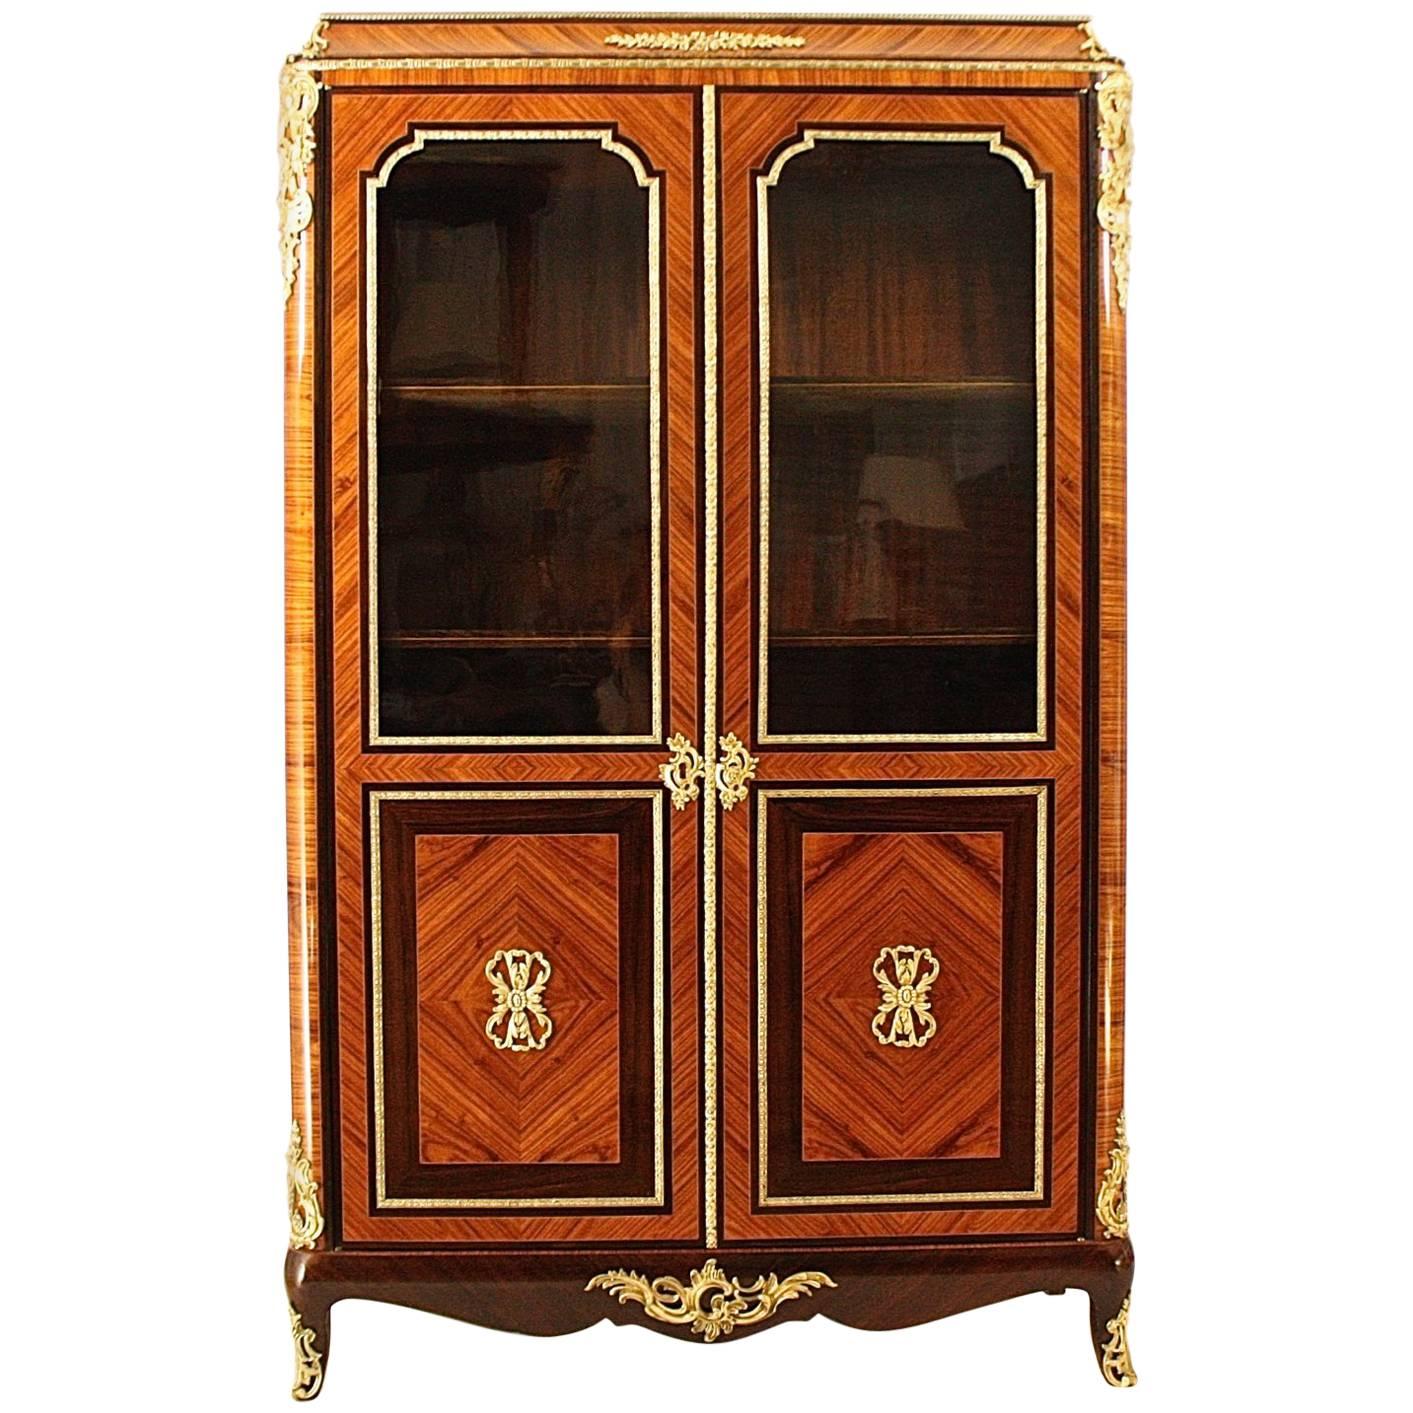 19th Century Vitrine or Bibiotheque in the Louis XV/XVI Transitionale Style